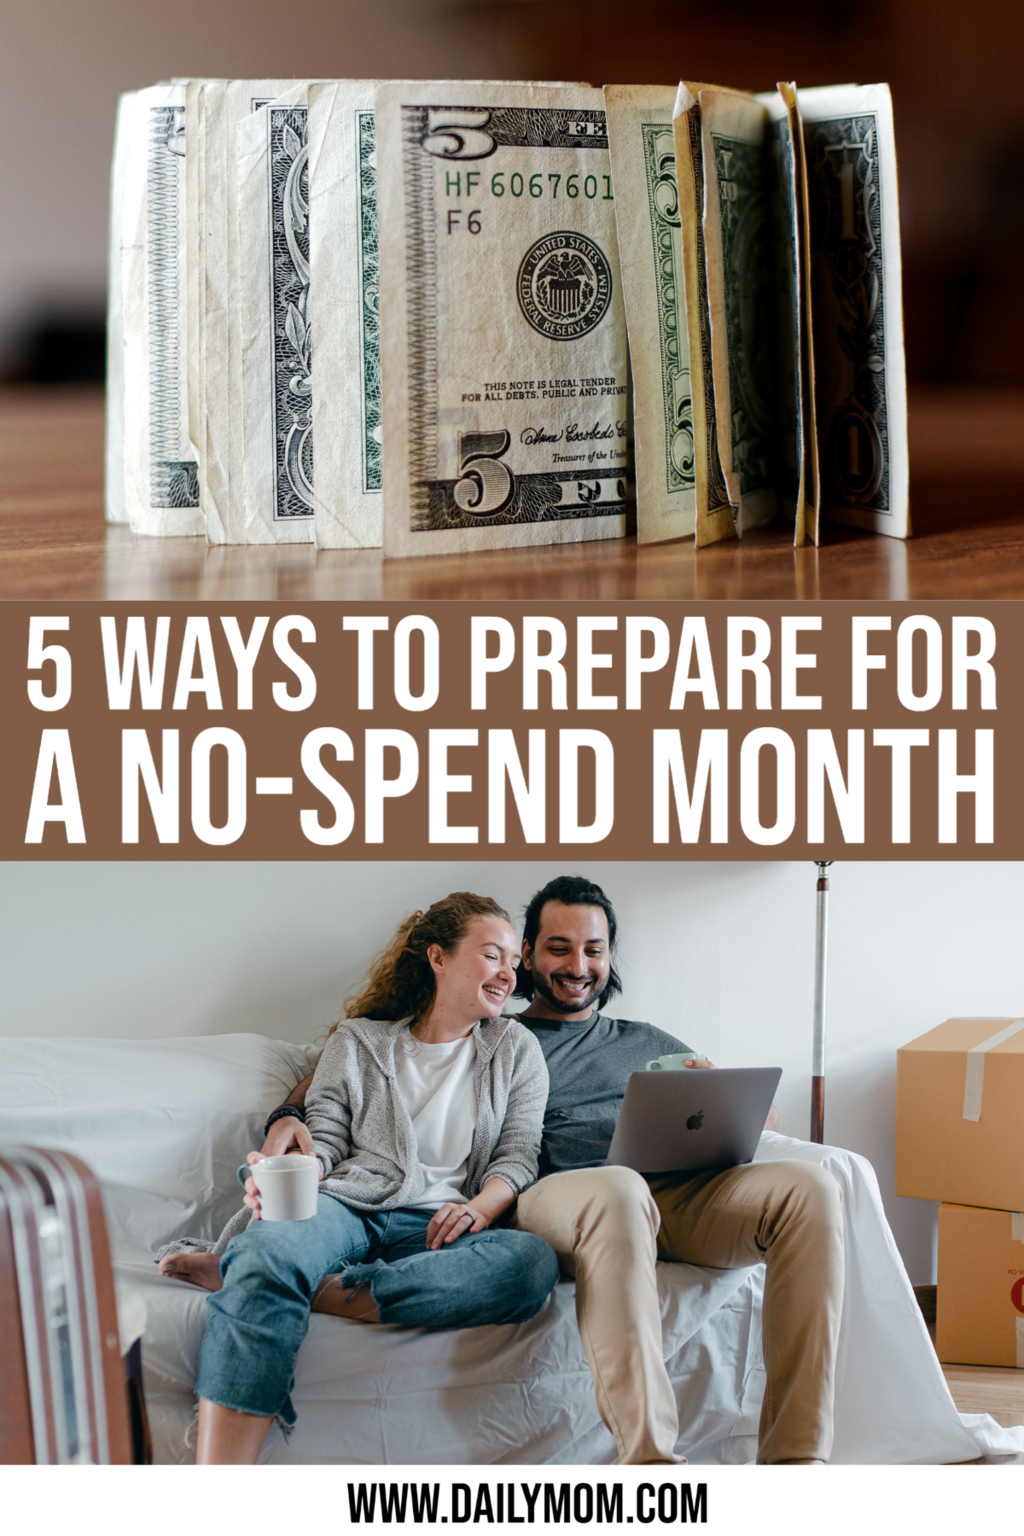 Have A Successful “no Spend Month” With These 5 Easy Ways To Prepare